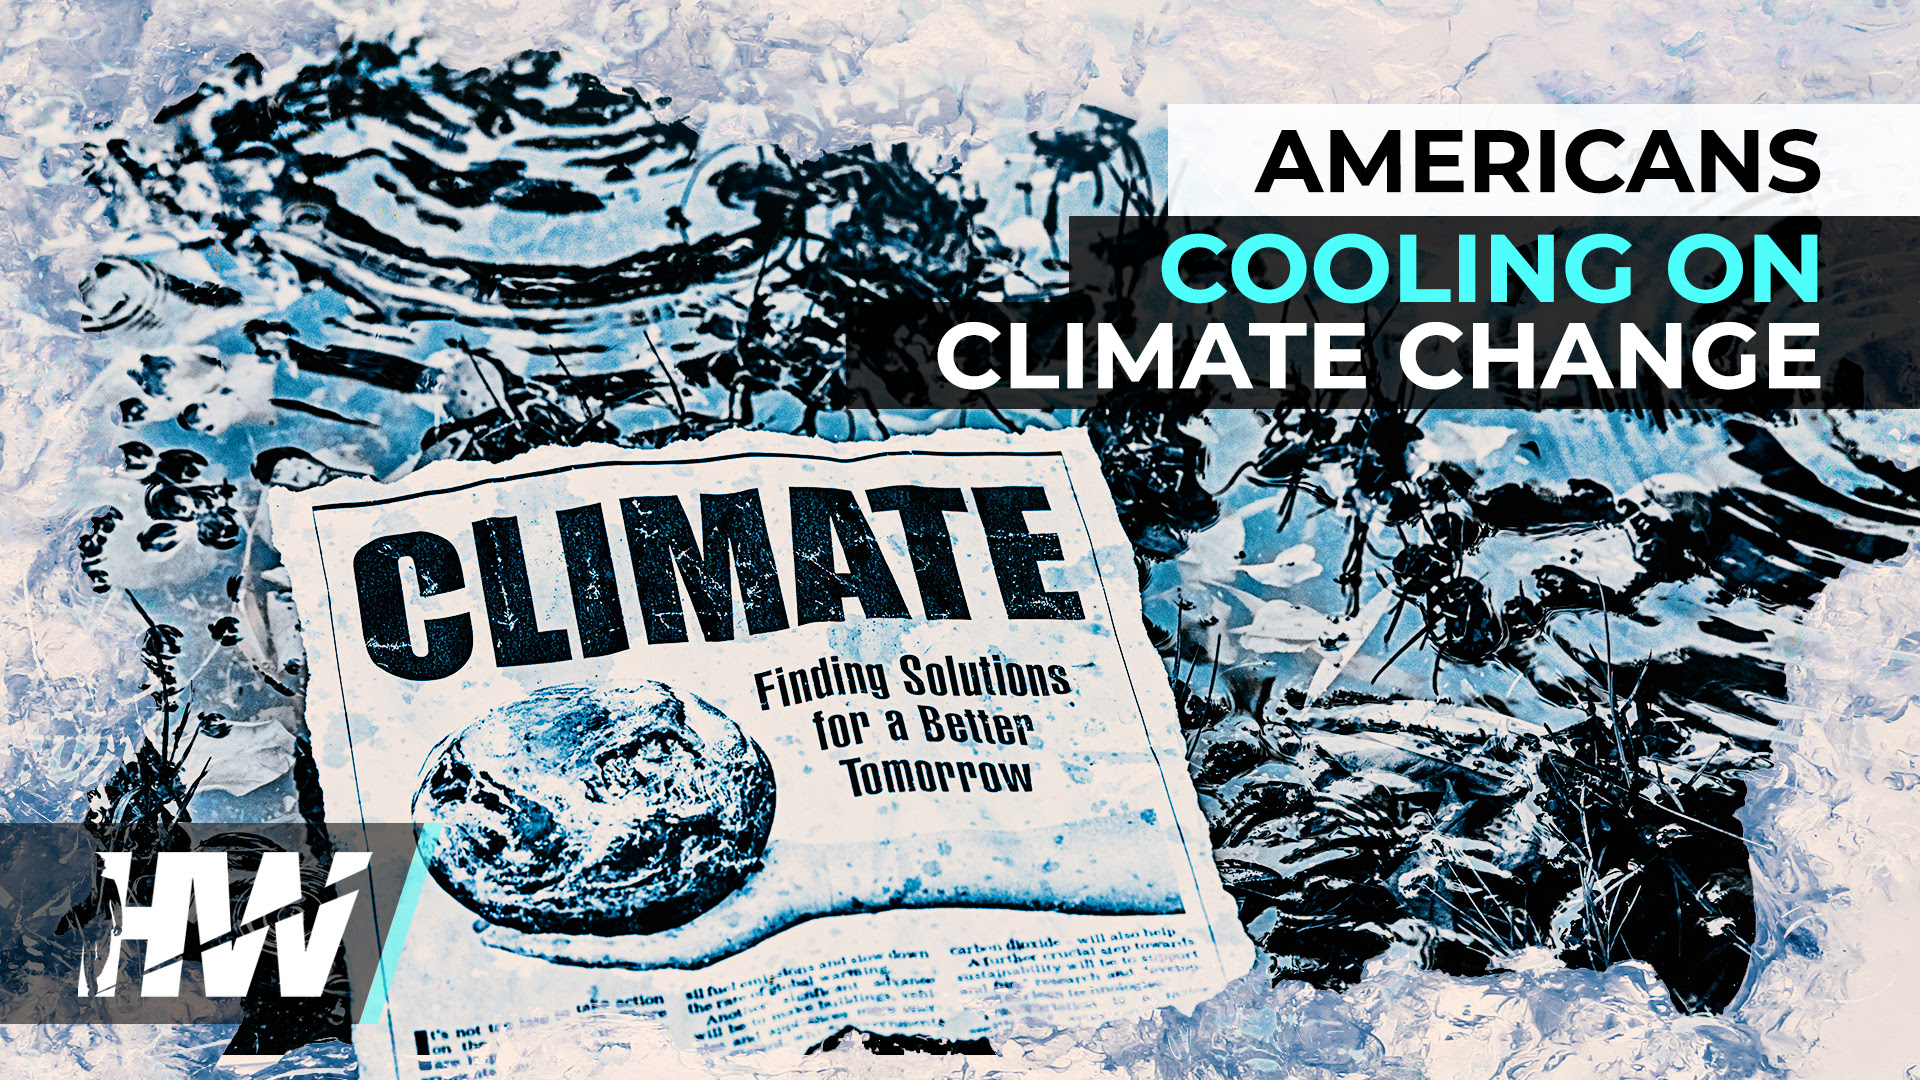 AMERICANS COOLING ON CLIMATE
                                  CHANGE